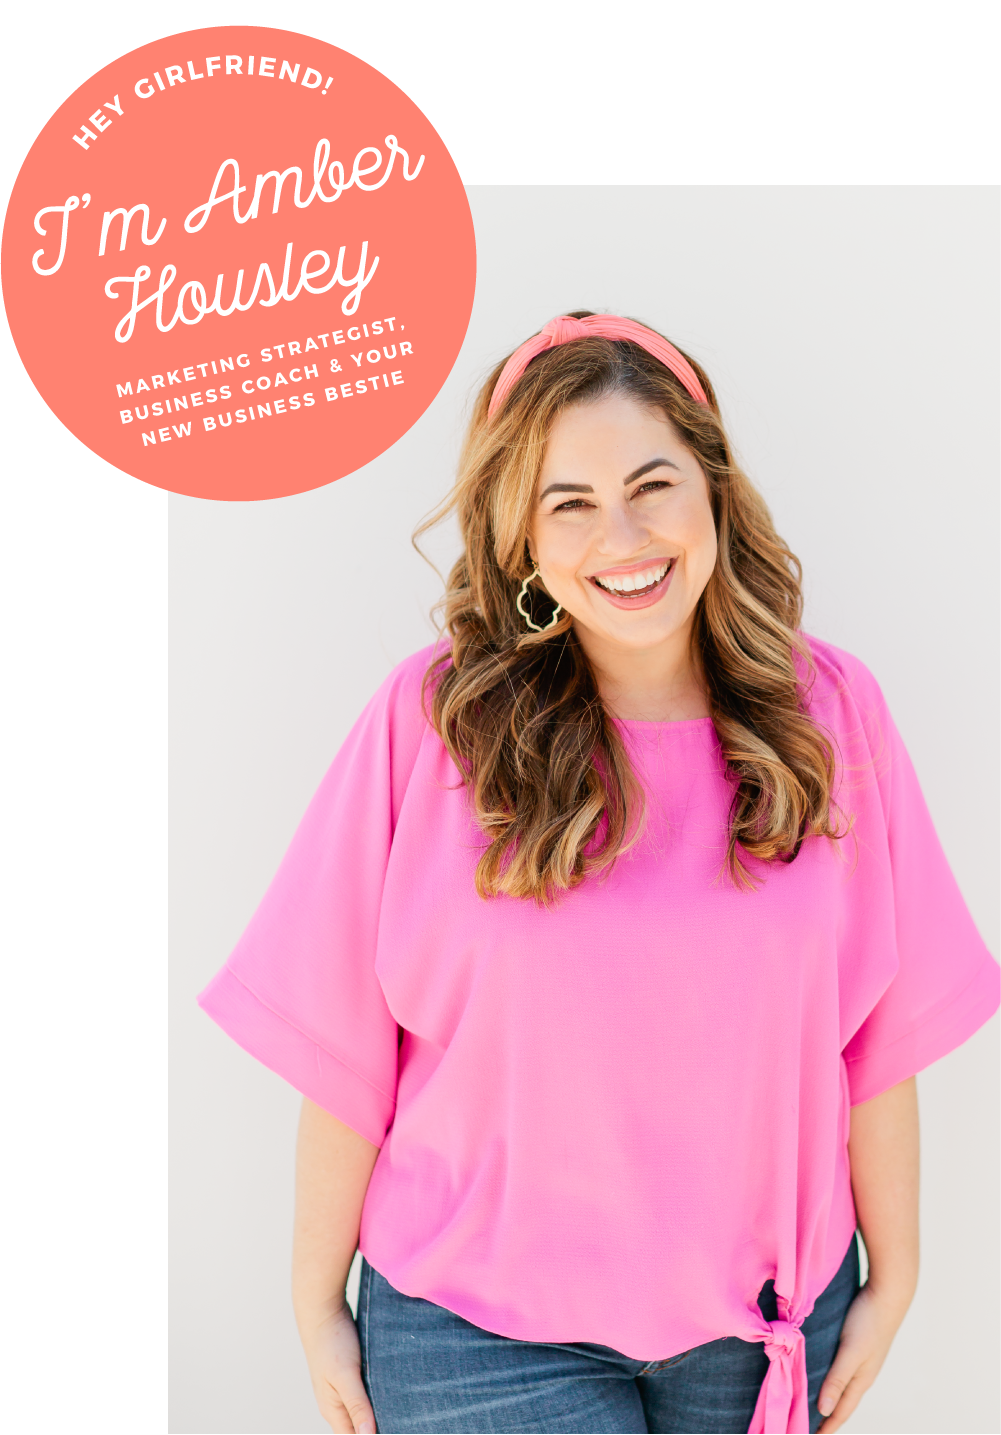 Amber Housley,  a female business coach and marketing strategist